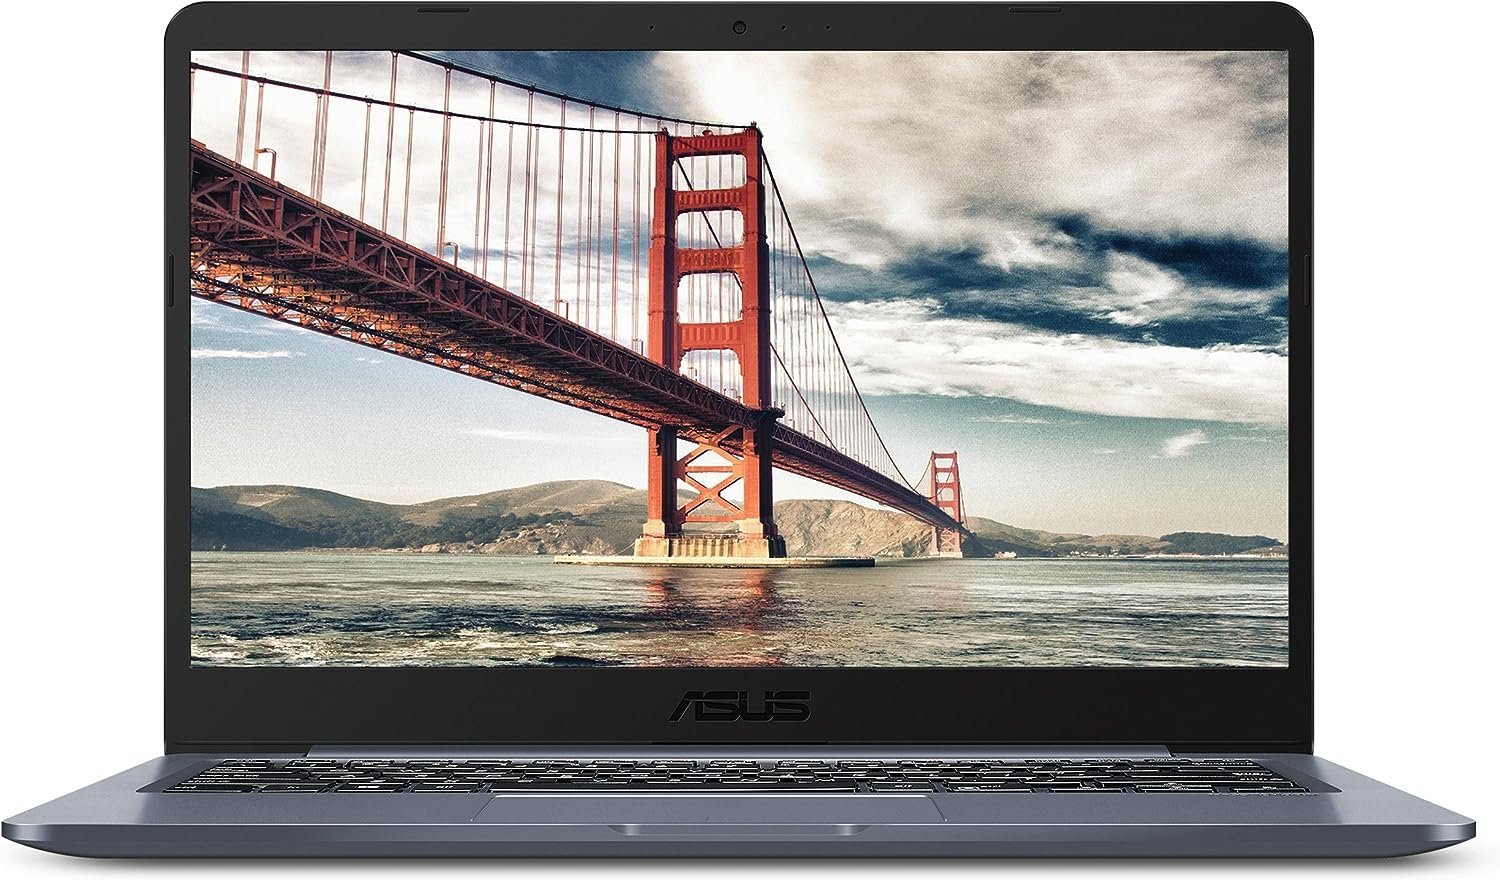 ASUS Laptop L406 Thin and Light Laptop